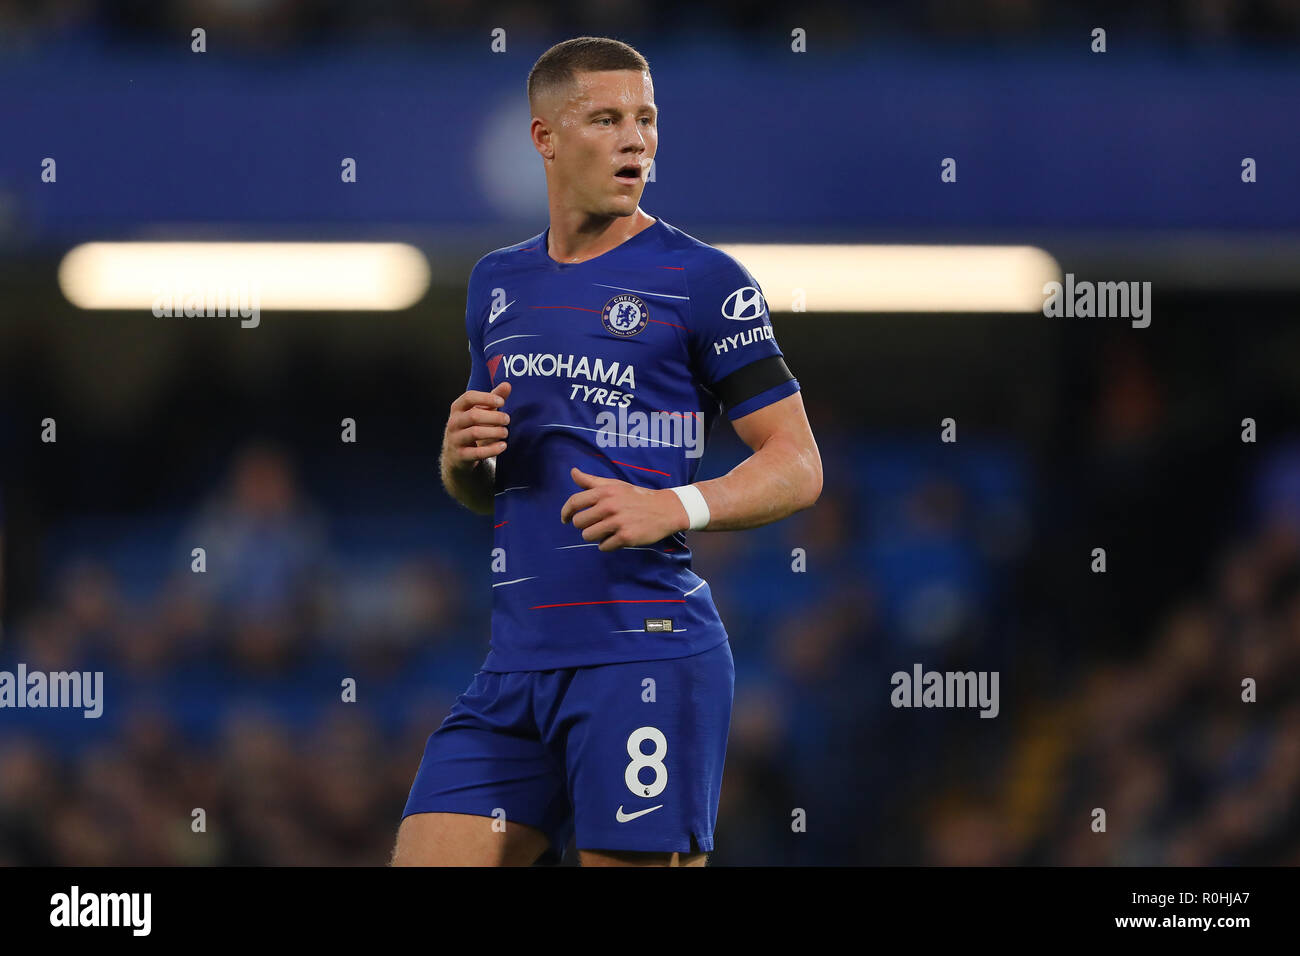 Ross Barkley of Chelsea - Chelsea v Crystal Palace, Premier League, Stamford Bridge, London - 4th November 2018  STRICTLY EDITORIAL USE ONLY - DataCo rules apply - The use of this image in a commercial context is strictly prohibited unless express permission has been given by the club(s) concerned. Examples of commercial usage include, but are not limited to, use in betting and gaming, marketing and advertising products. No use with unauthorised audio, video, data, fixture lists, club and or league logos or services including those listed as 'live' Stock Photo